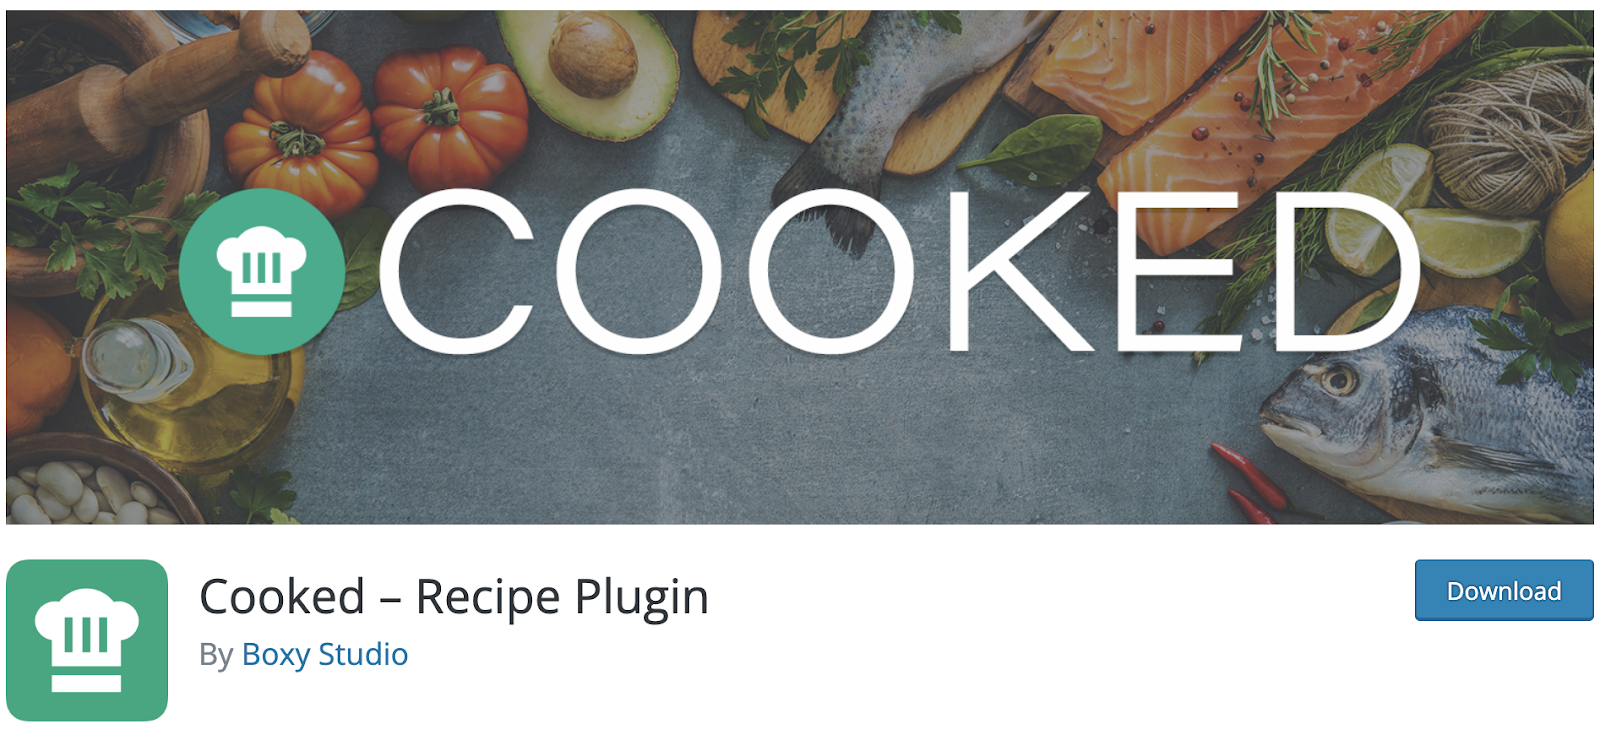 Cooked - Recipe Plugin download page